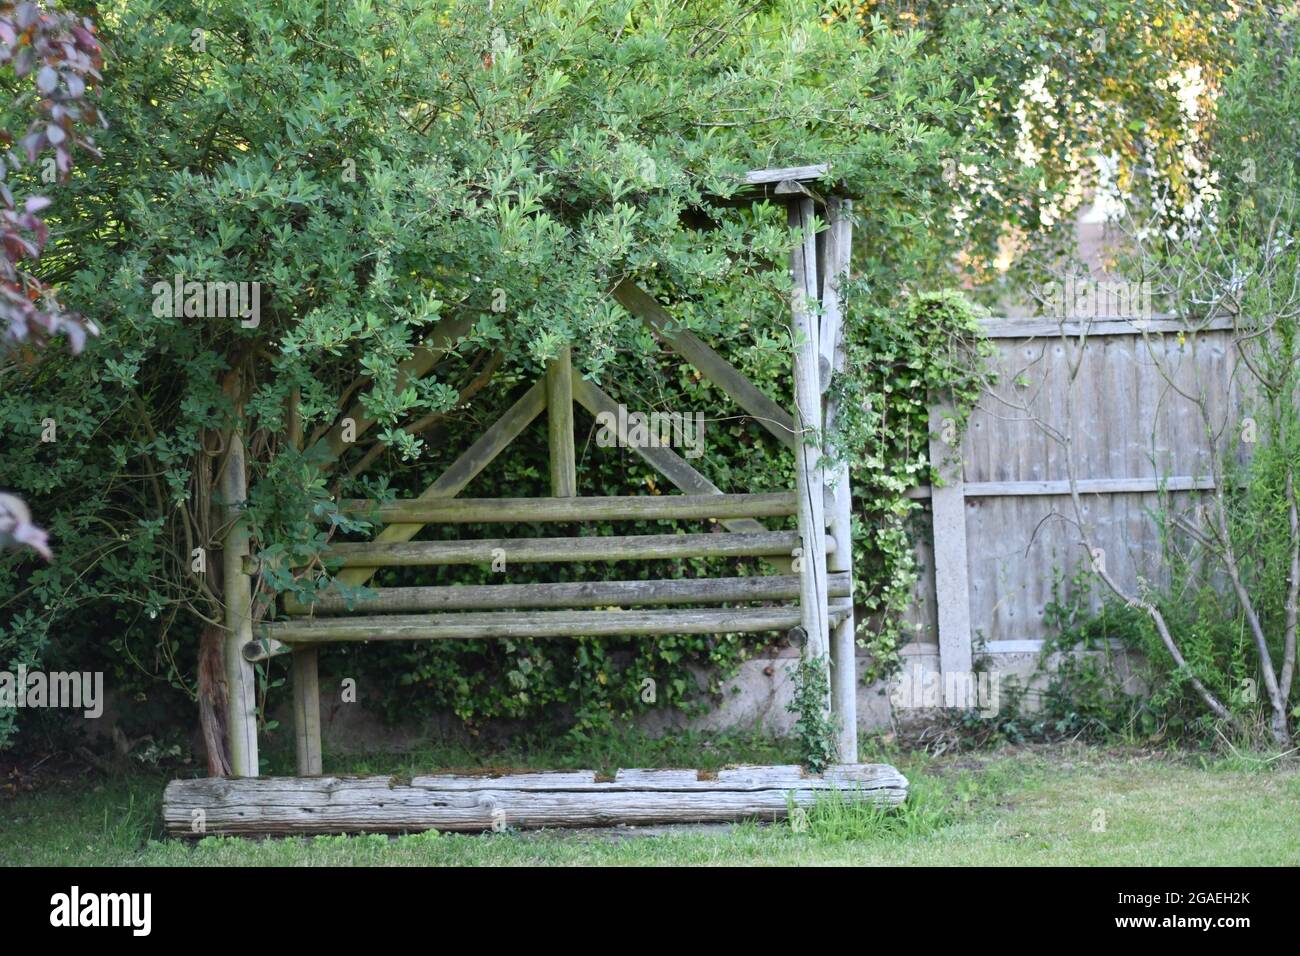 An aged, rustic, garden bench, arbor bench, sitting at the bottom of a garden with overgrown vegetation Stock Photo